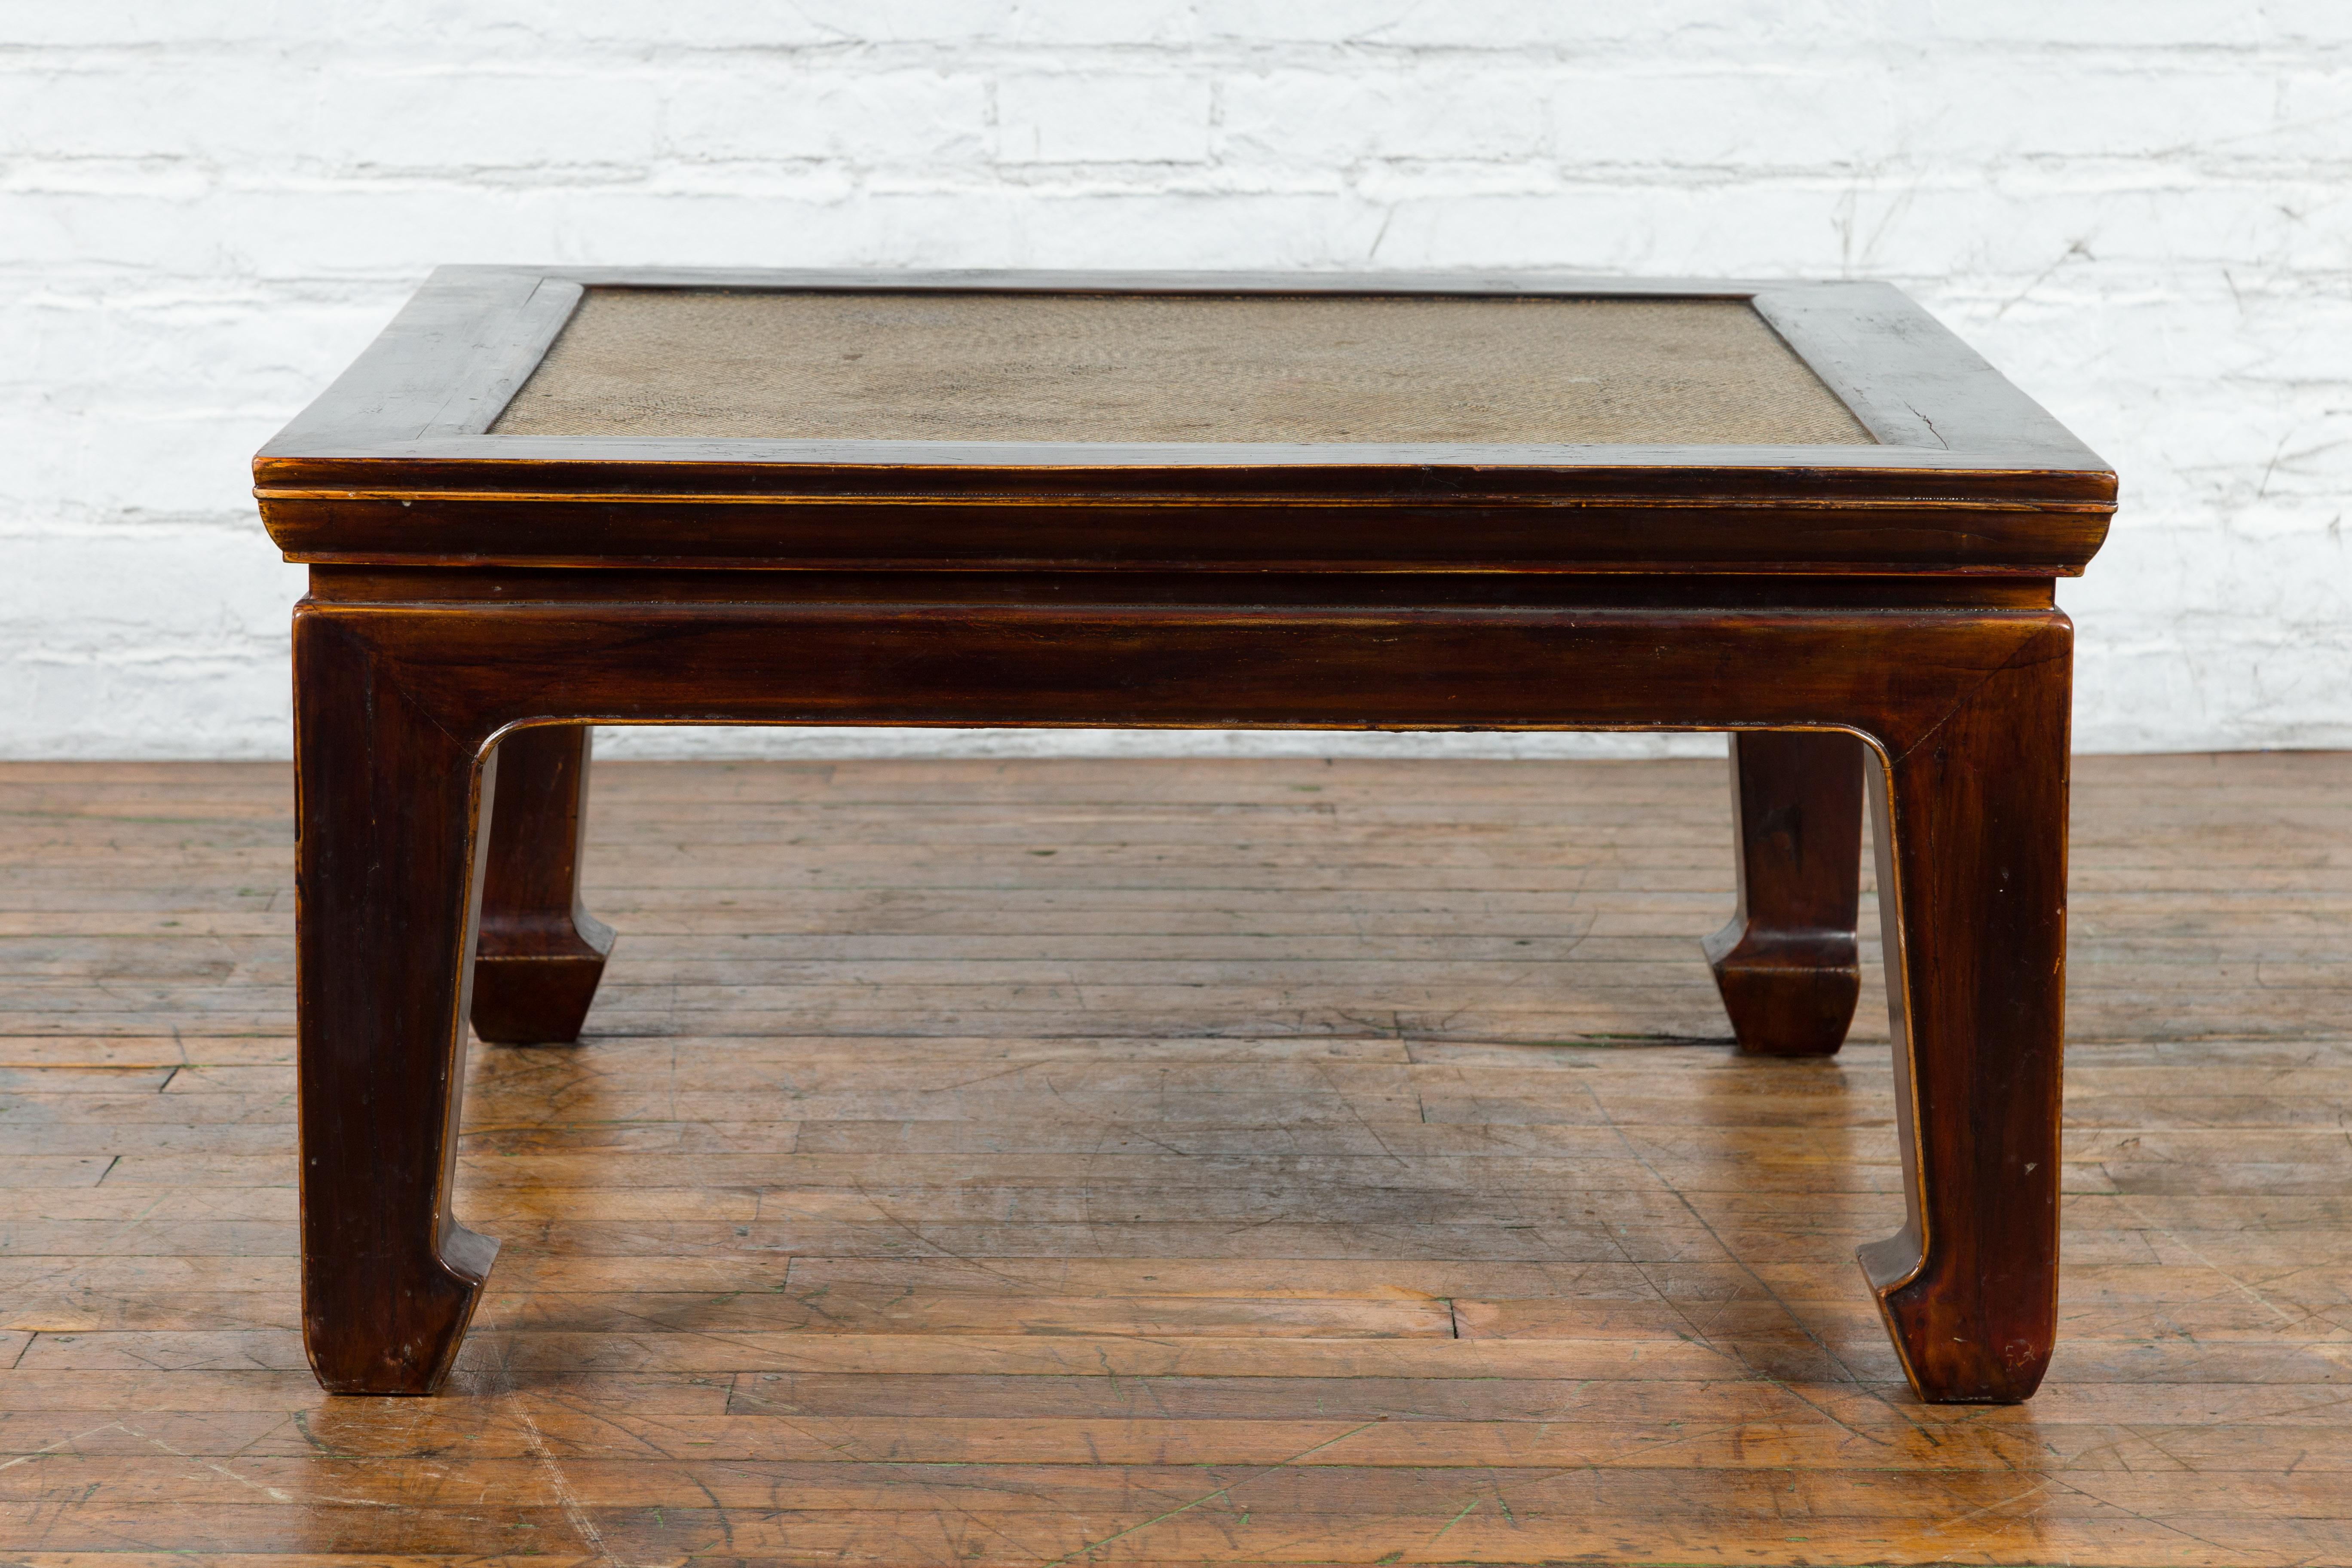 A Chinese Qing Dynasty period wooden coffee table from the late 19th, early 20th century, with woven rattan top, horse hoof legs and dark brown lacquer. Created in China during the Qing Dynasty period at the Turn of the Century, this wooden coffee